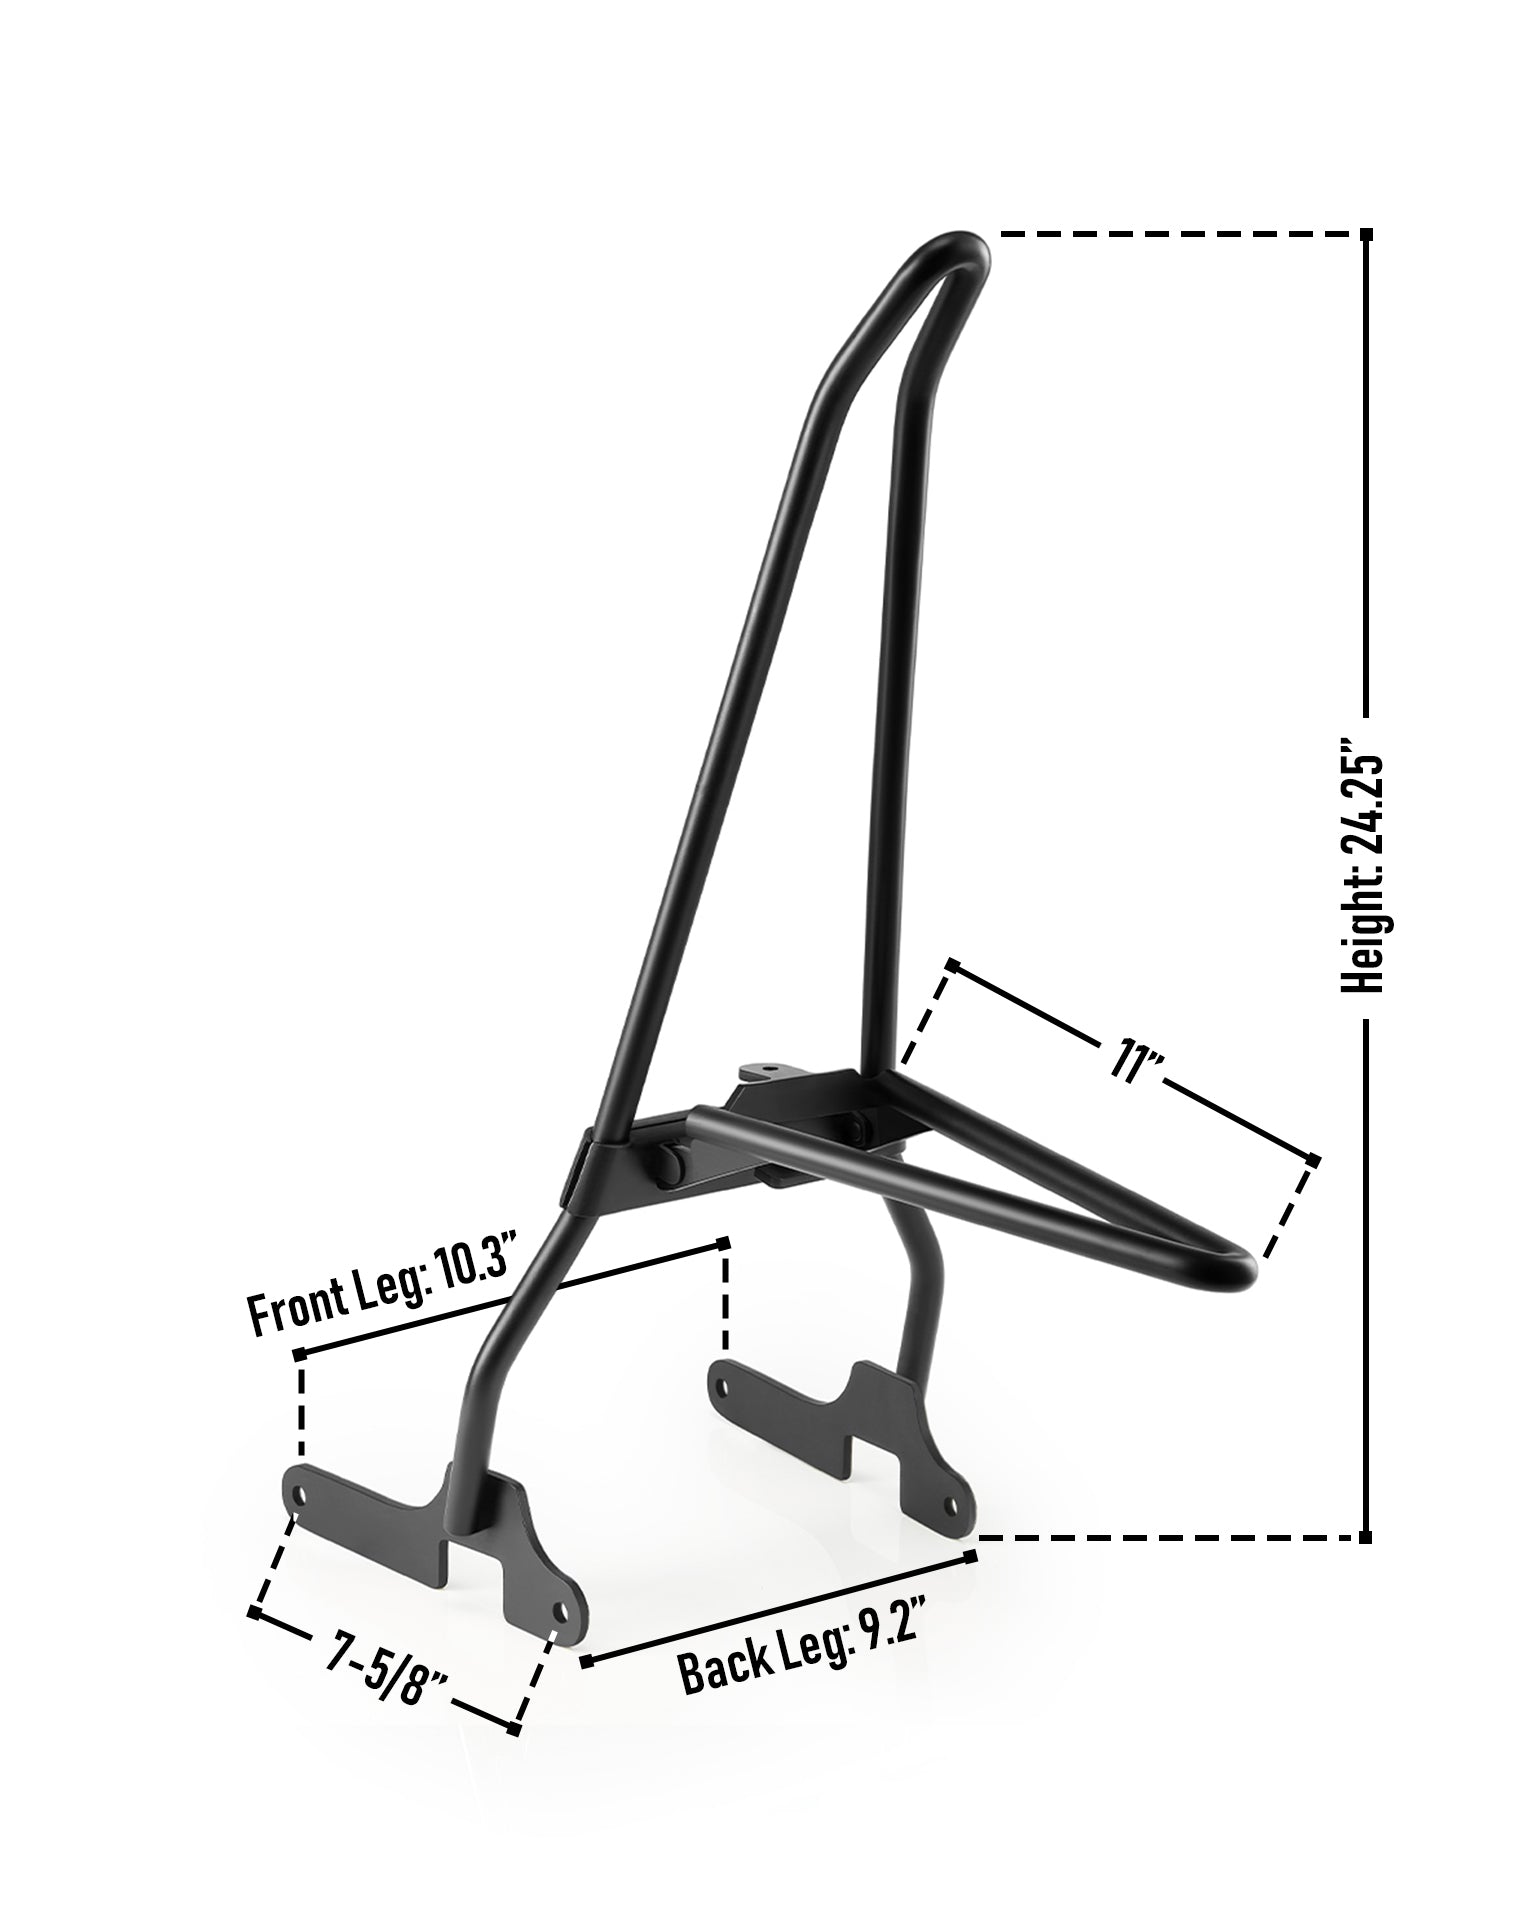 Iron Born Sissy Bar with Foldable Luggage Rack for Harley Sportster 1200 Nightster XL1200N Matte Black Dimension